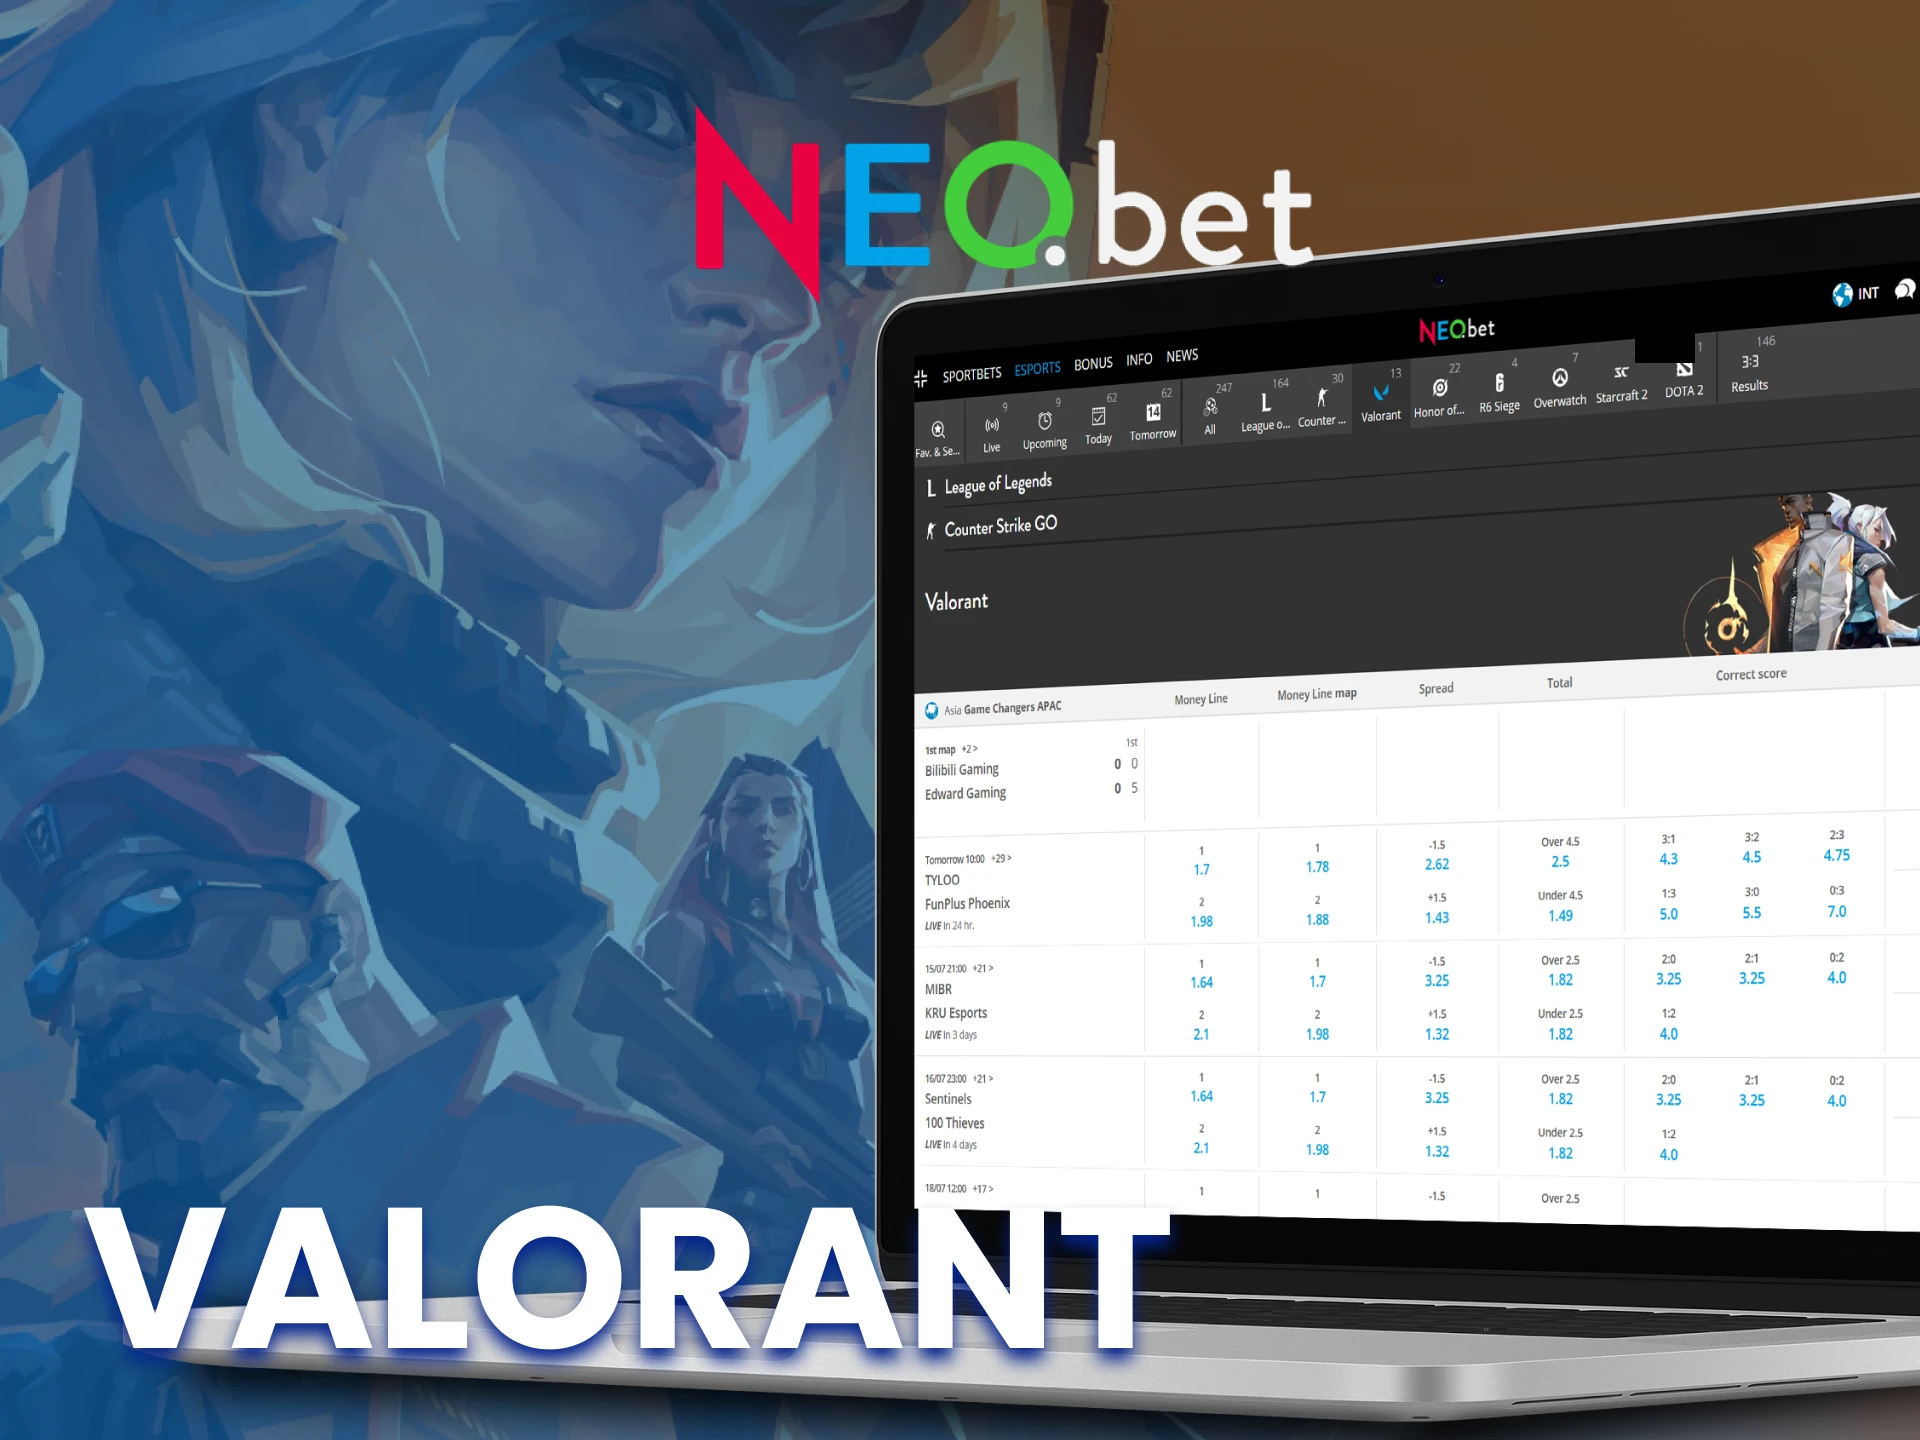 Place your bets on Valorant with NEO.bet.